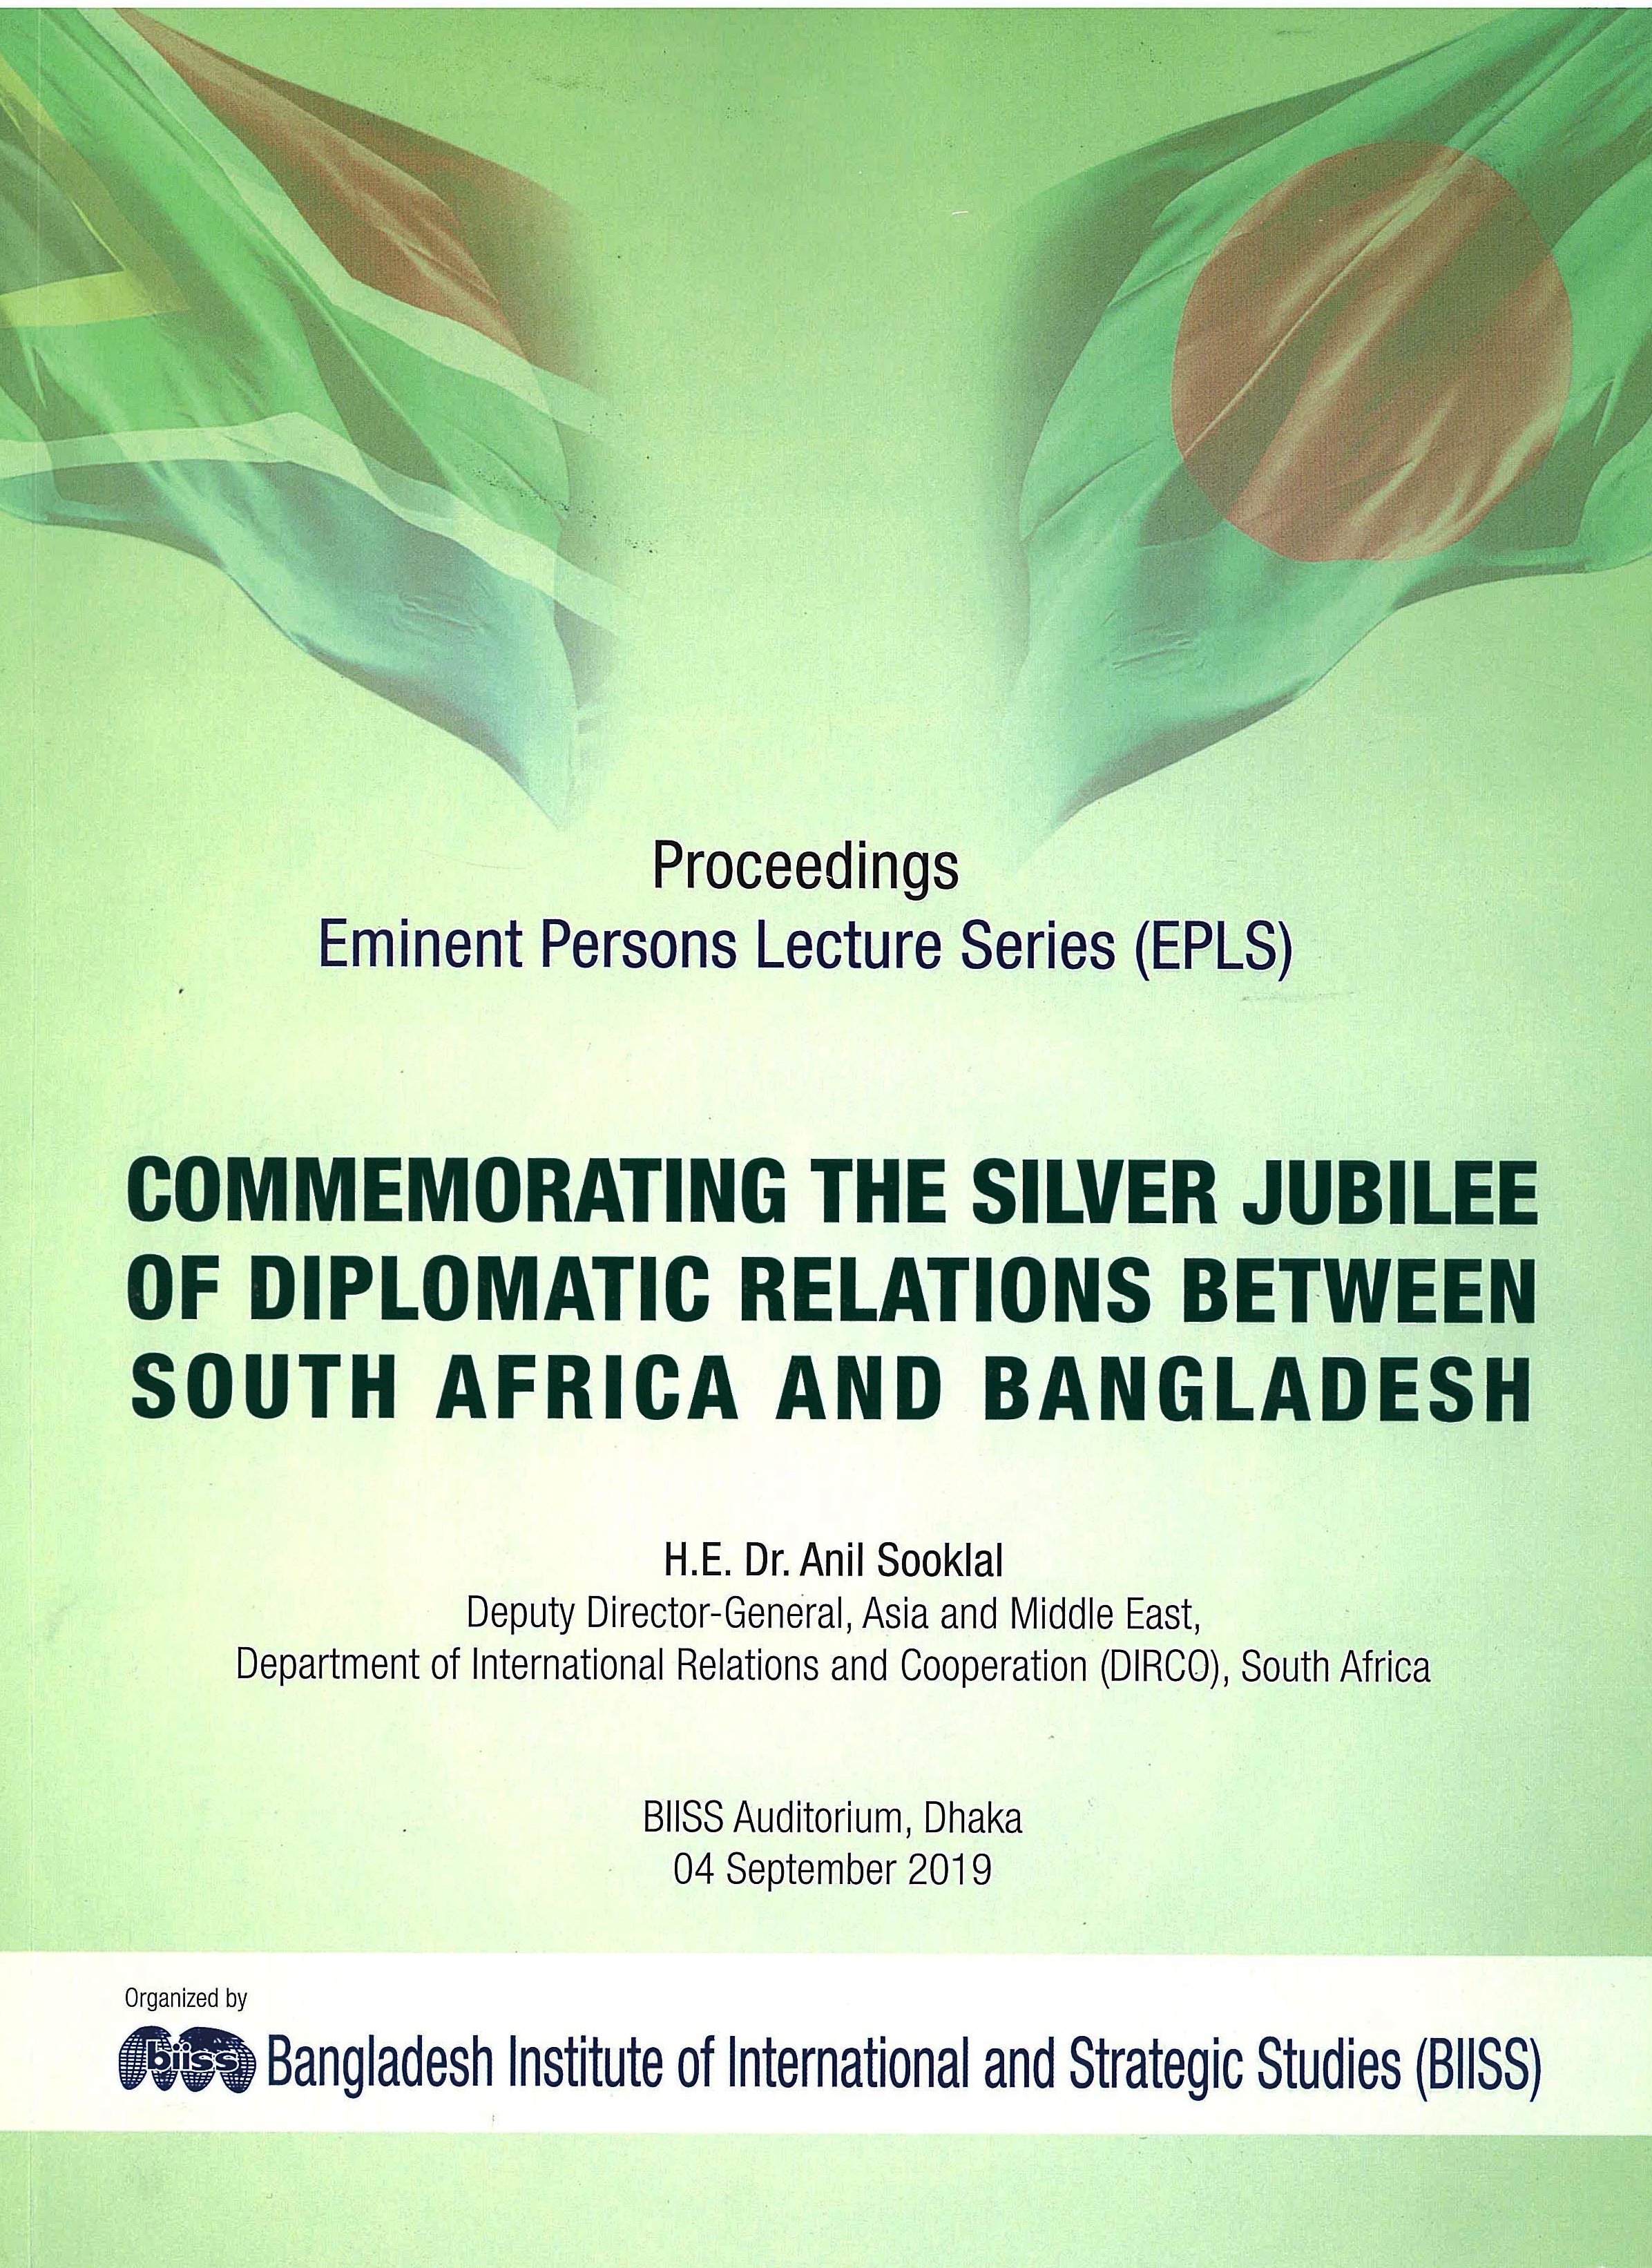 Eminent Persons Lecture Series (EPLS) "Commemorating the Silver Jubilee of Diplomatic Relations Between South Africa and Bangladesh"